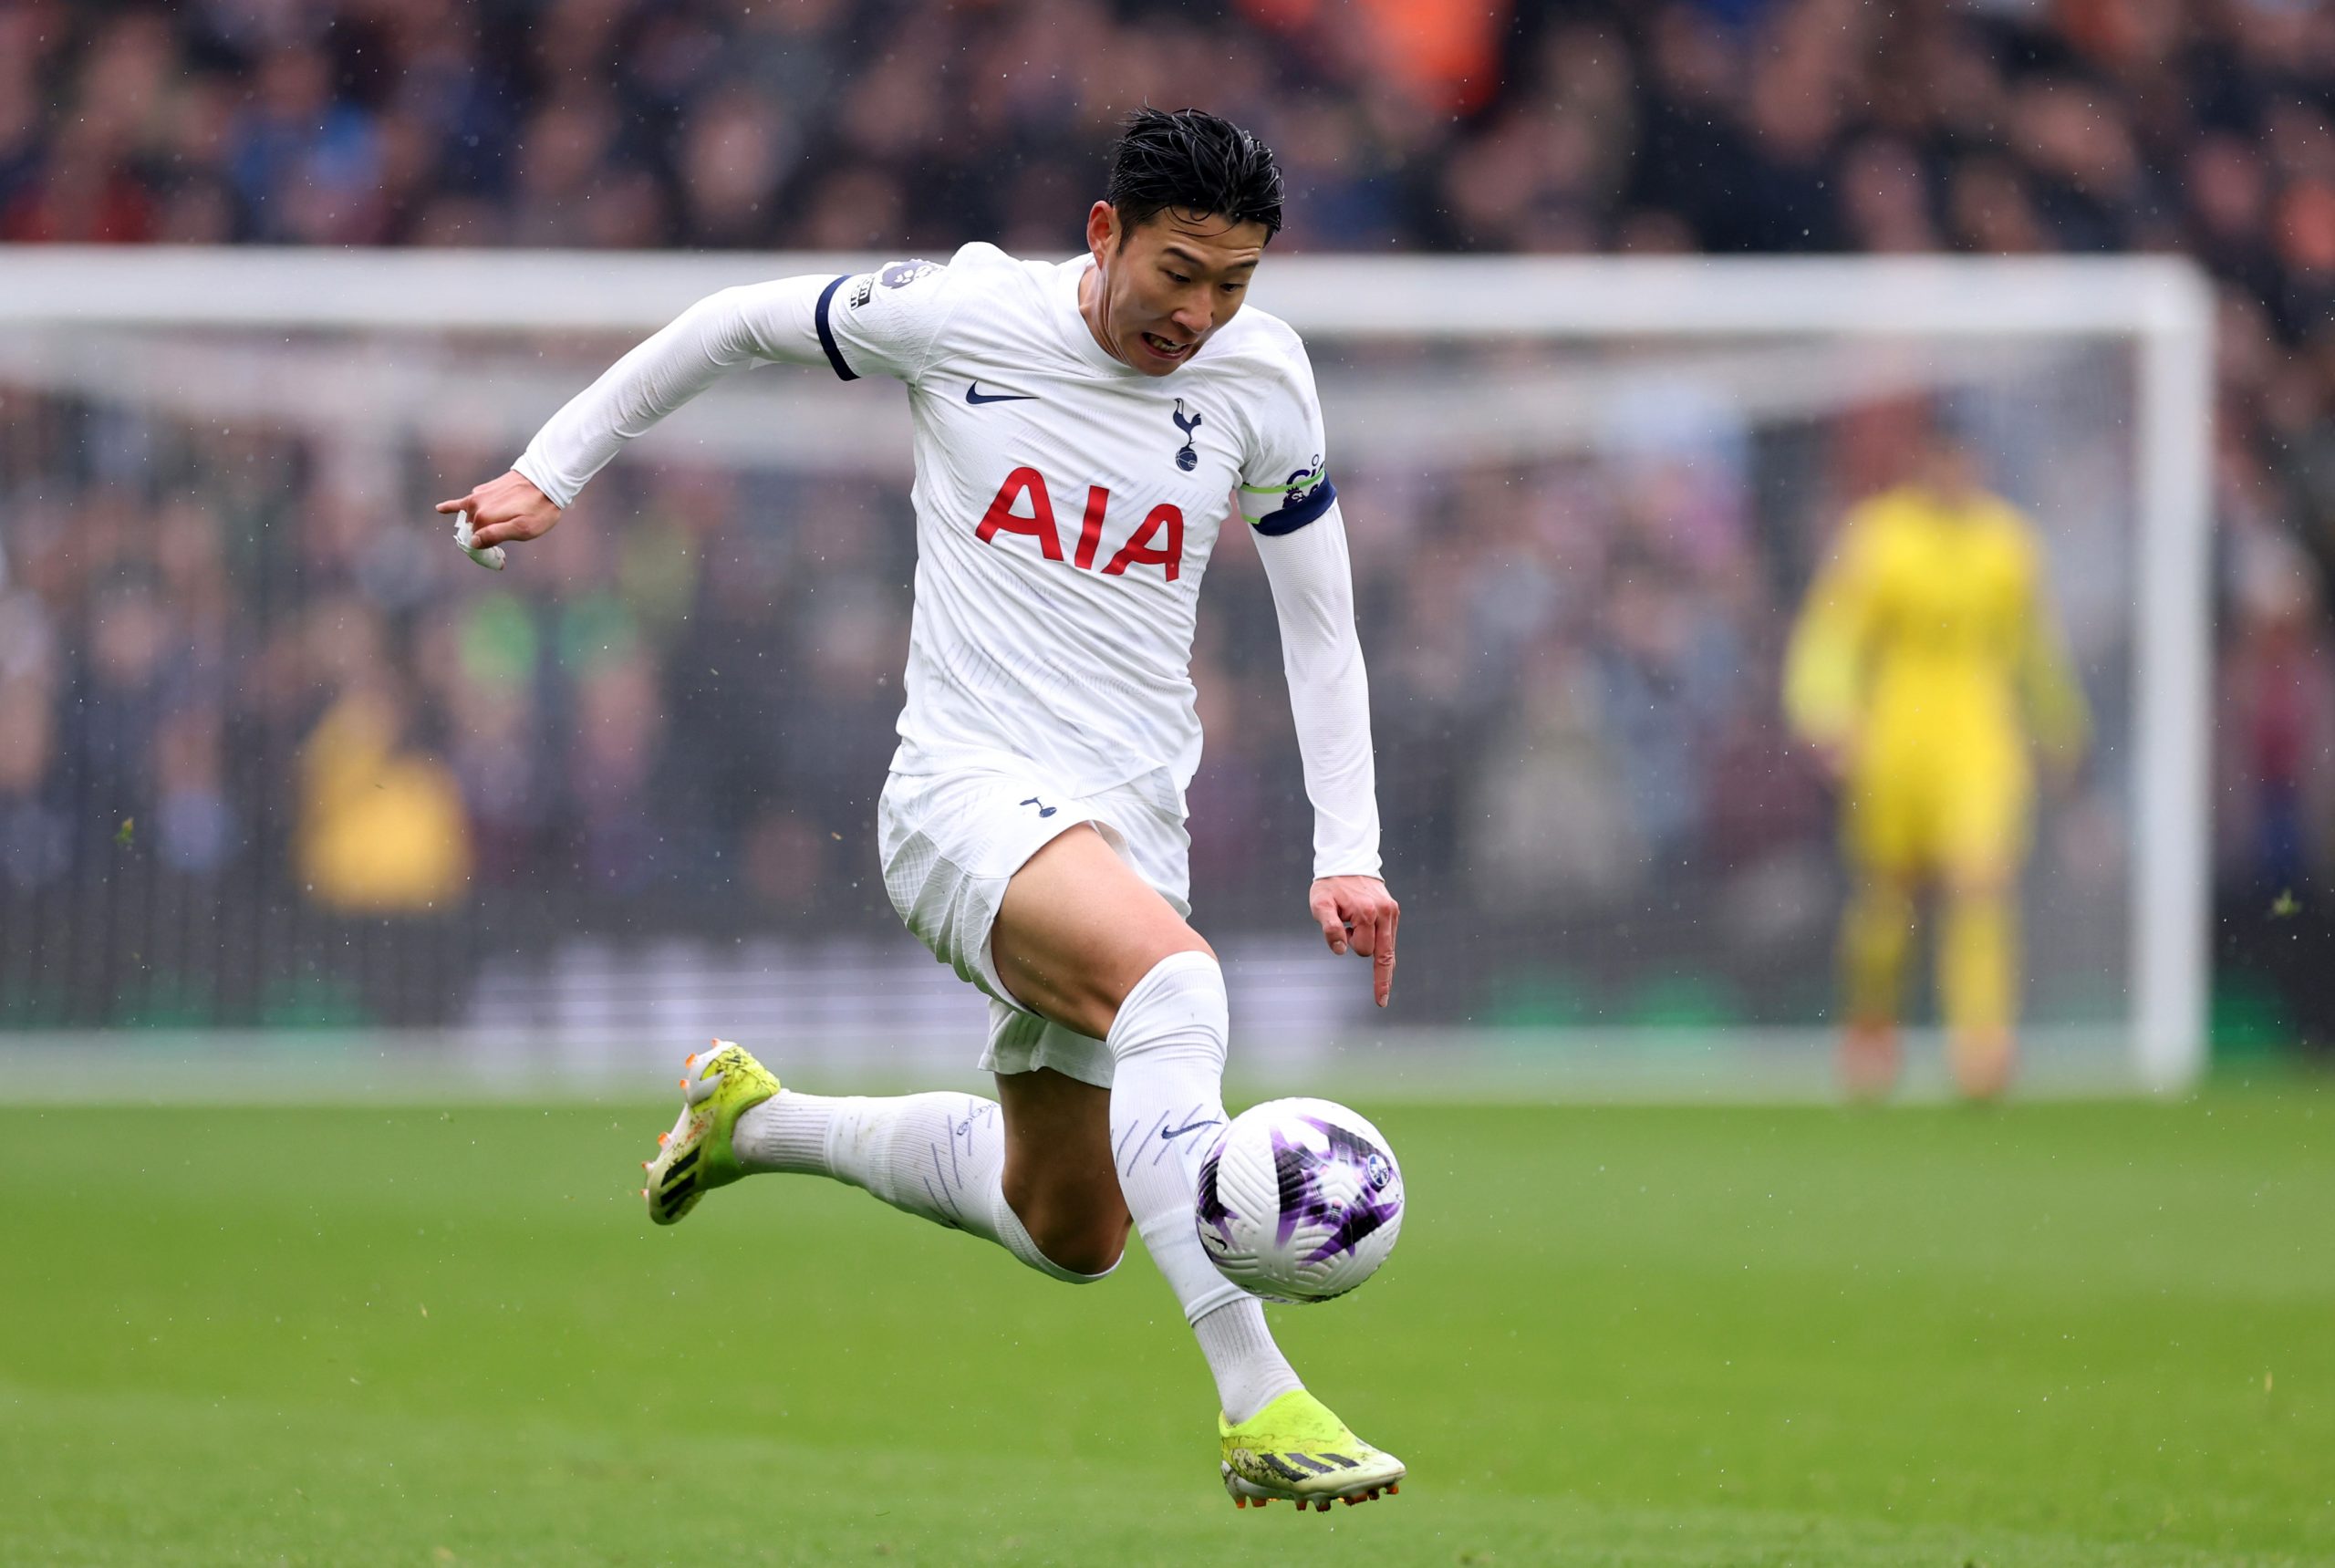 What next for Tottenham and Son Heung-min